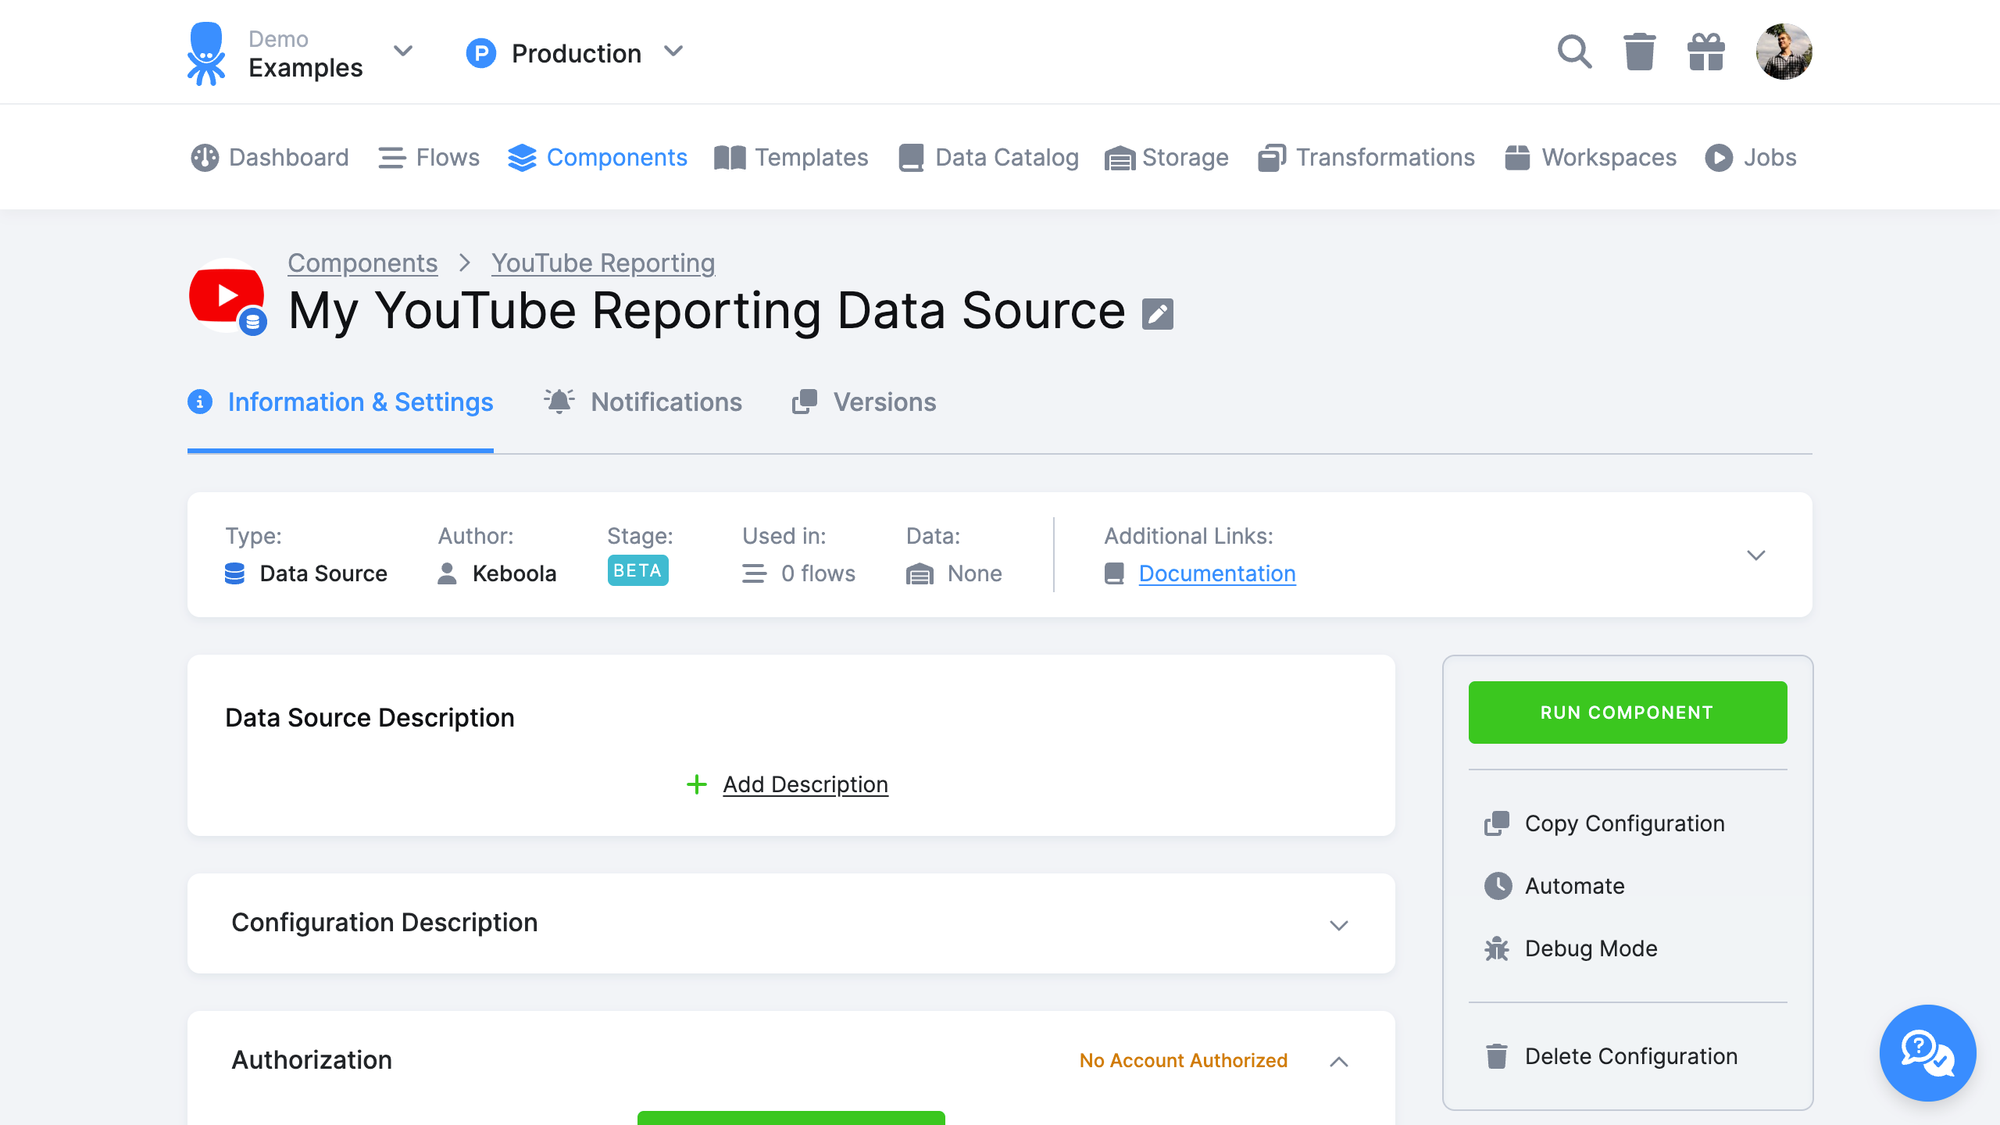 New Data Source for YouTube Reporting